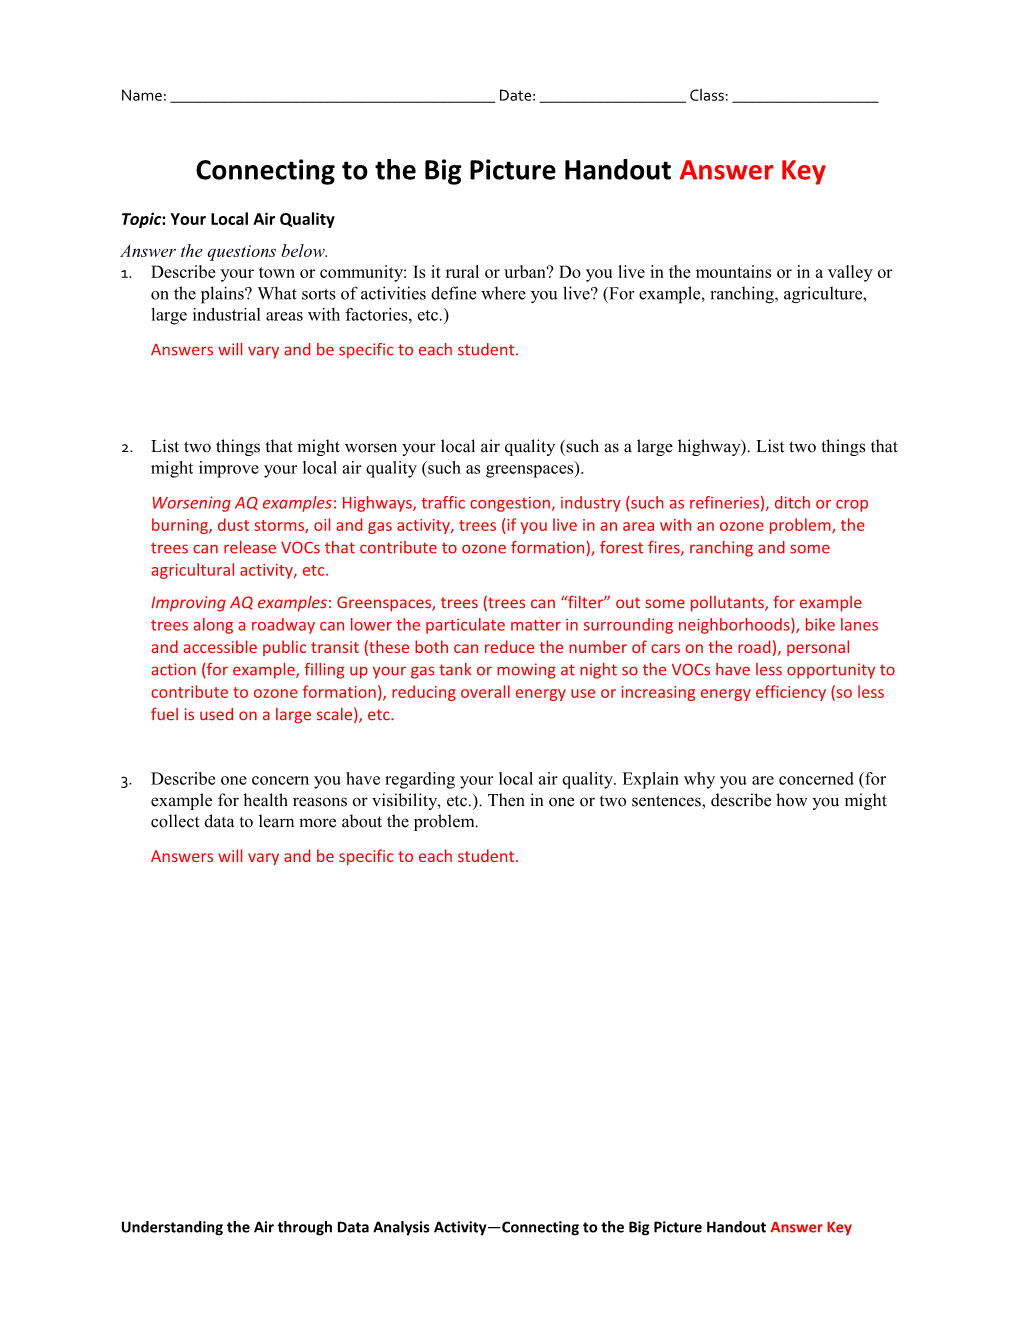 Connecting to the Big Picture Handout Answer Key